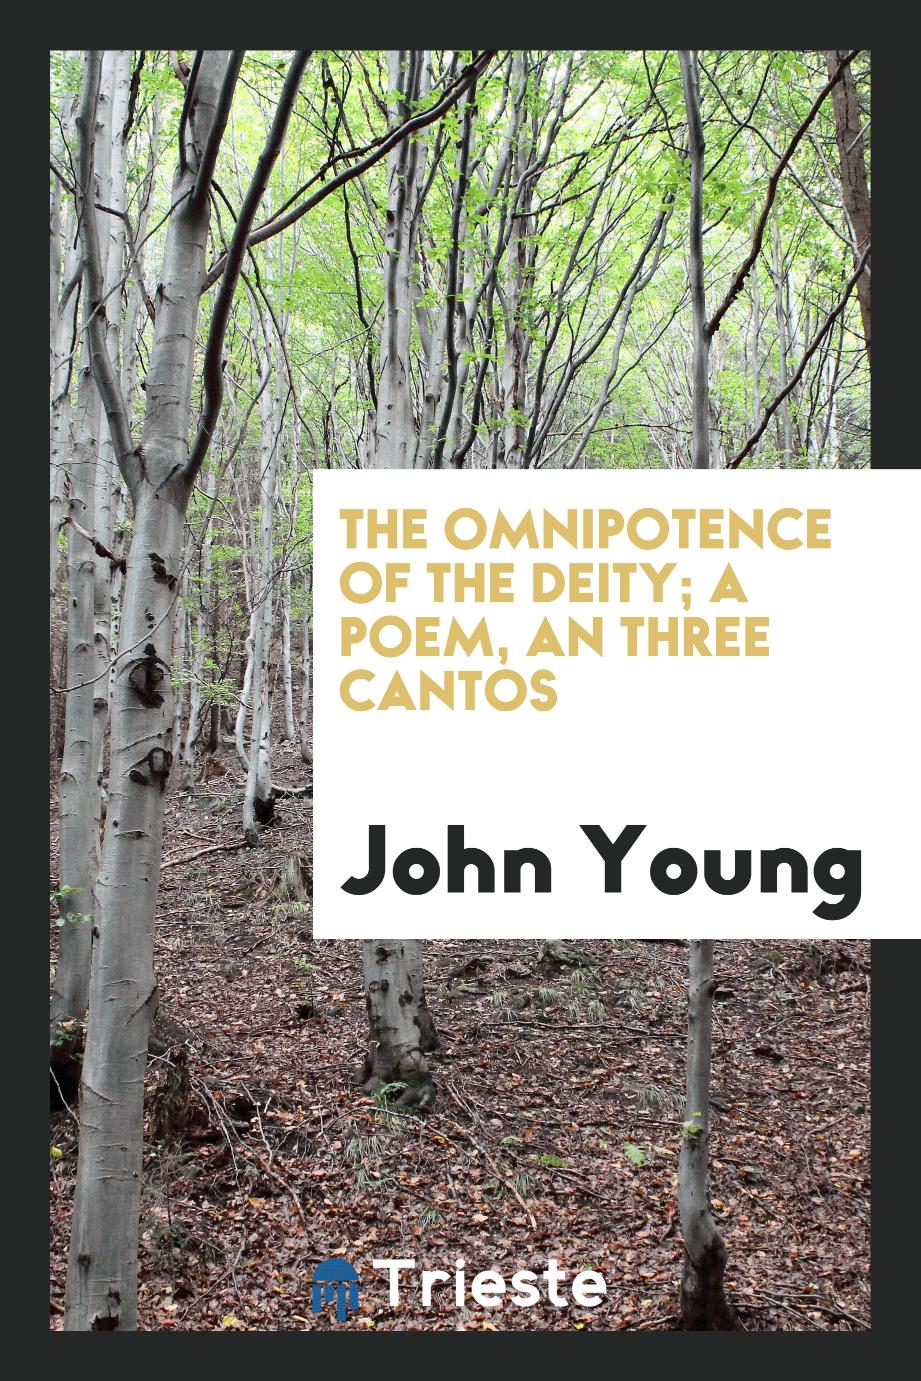 The omnipotence of the Deity; a poem, an three cantos